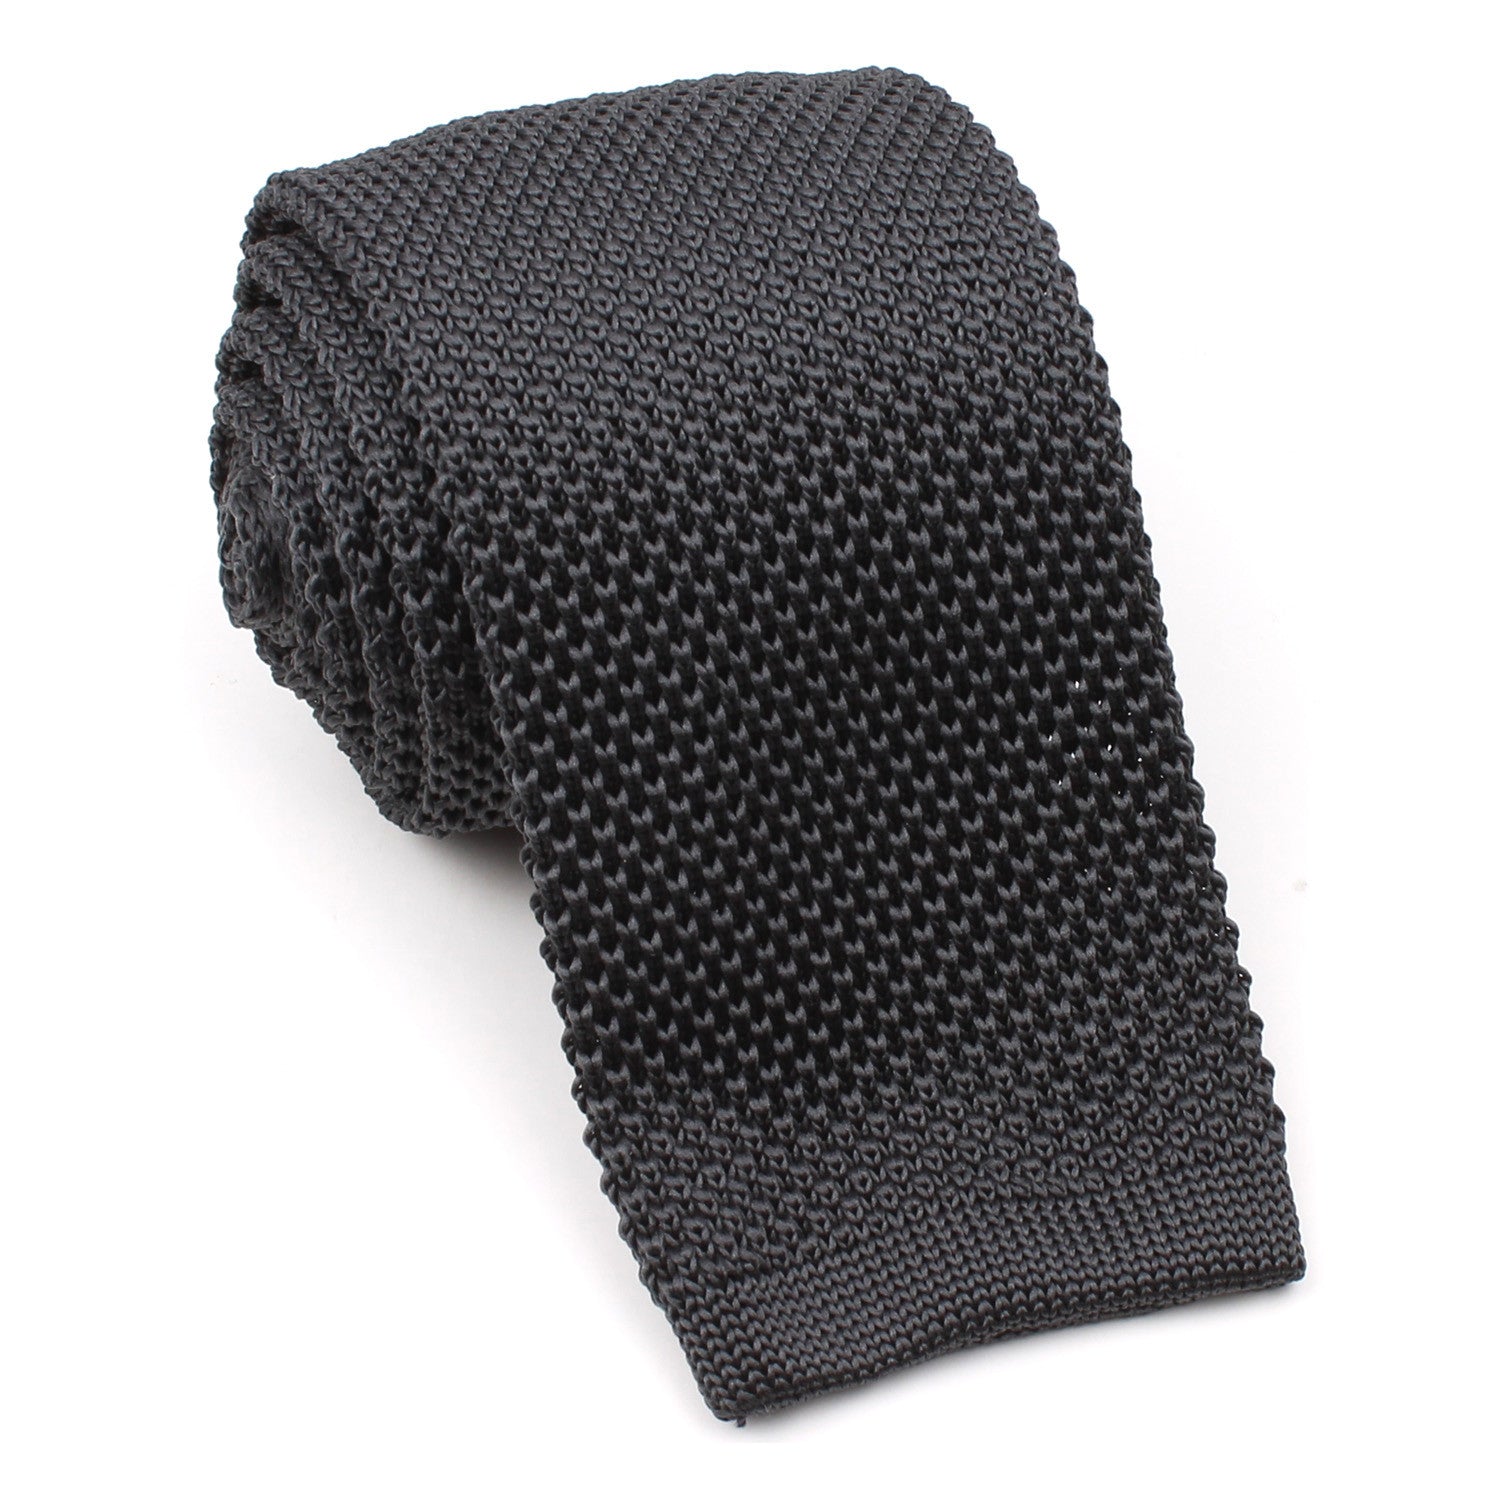 Charcoal Grey Knitted Tie OTAA